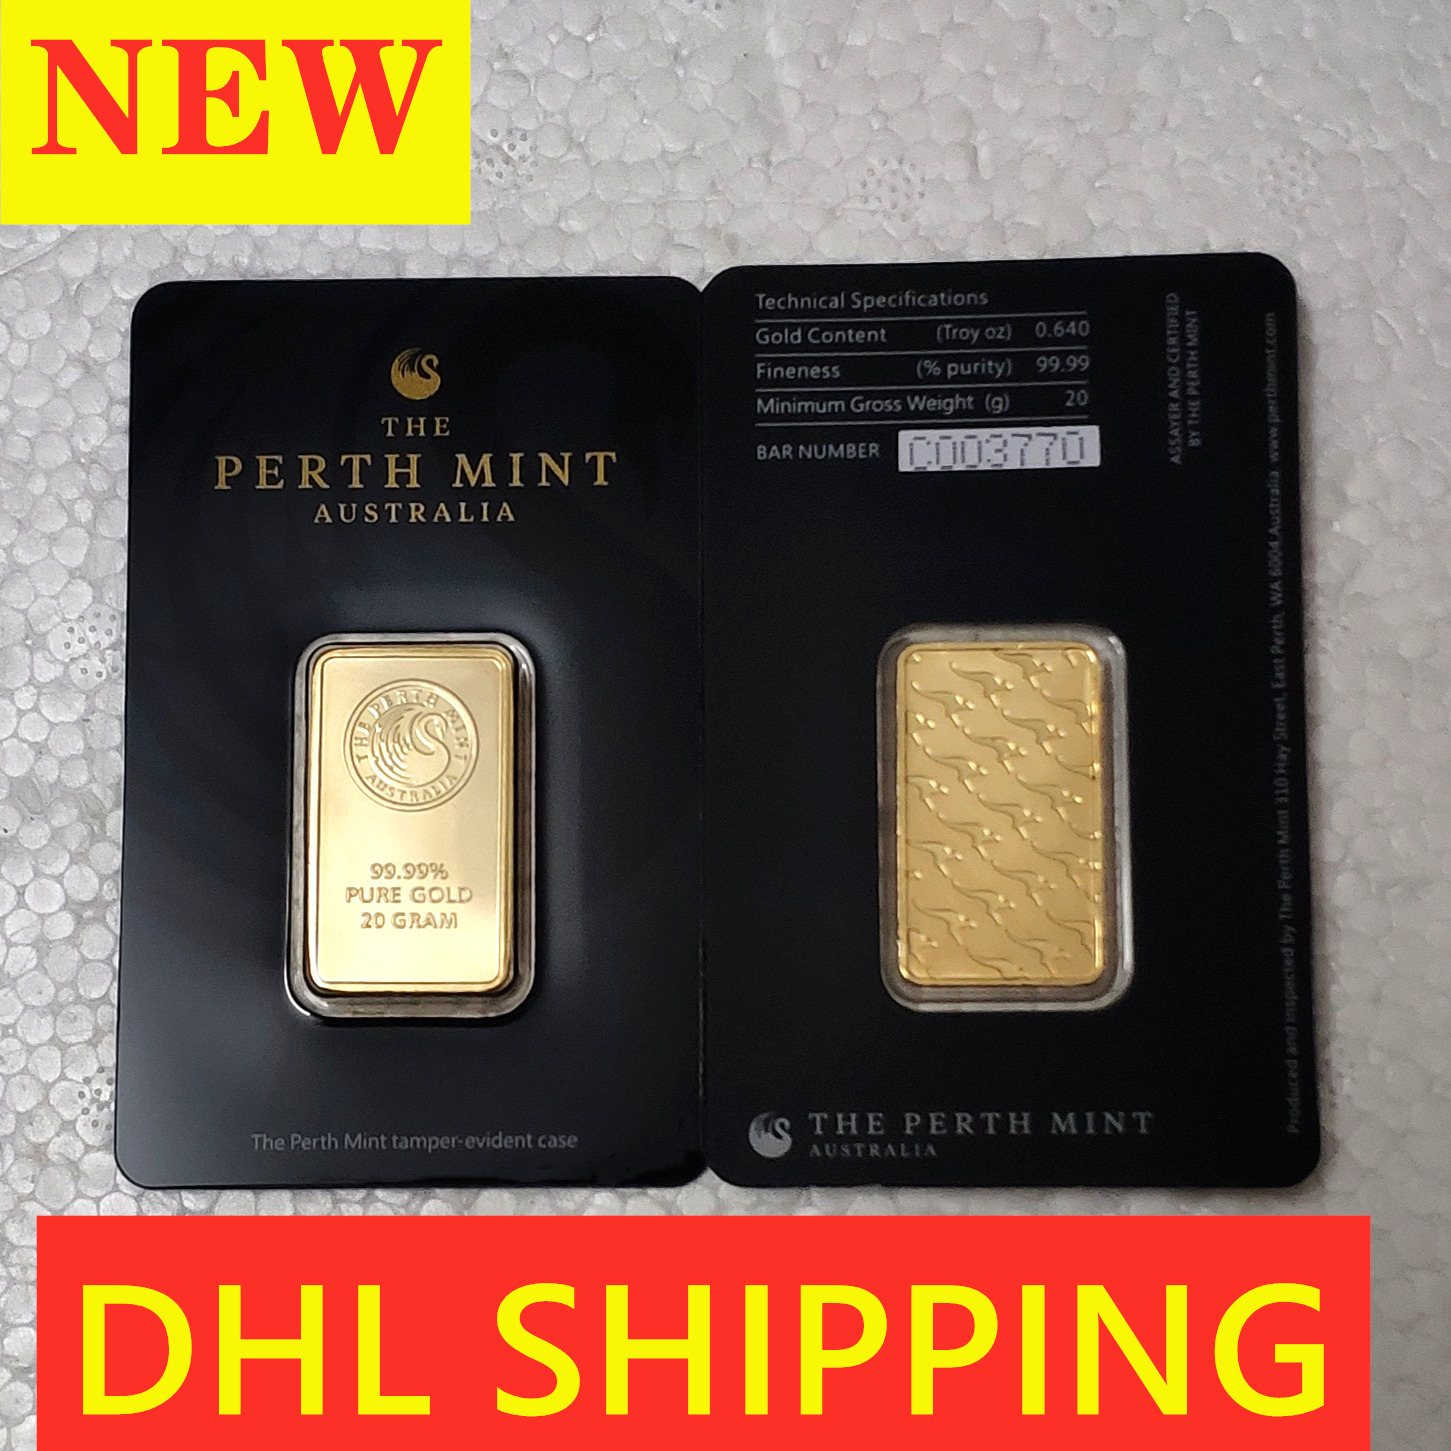 

20Gram Australia the perth mint 999 fine 24k plated bar Non magnetic gold bullion Collections souvenirs business gifts